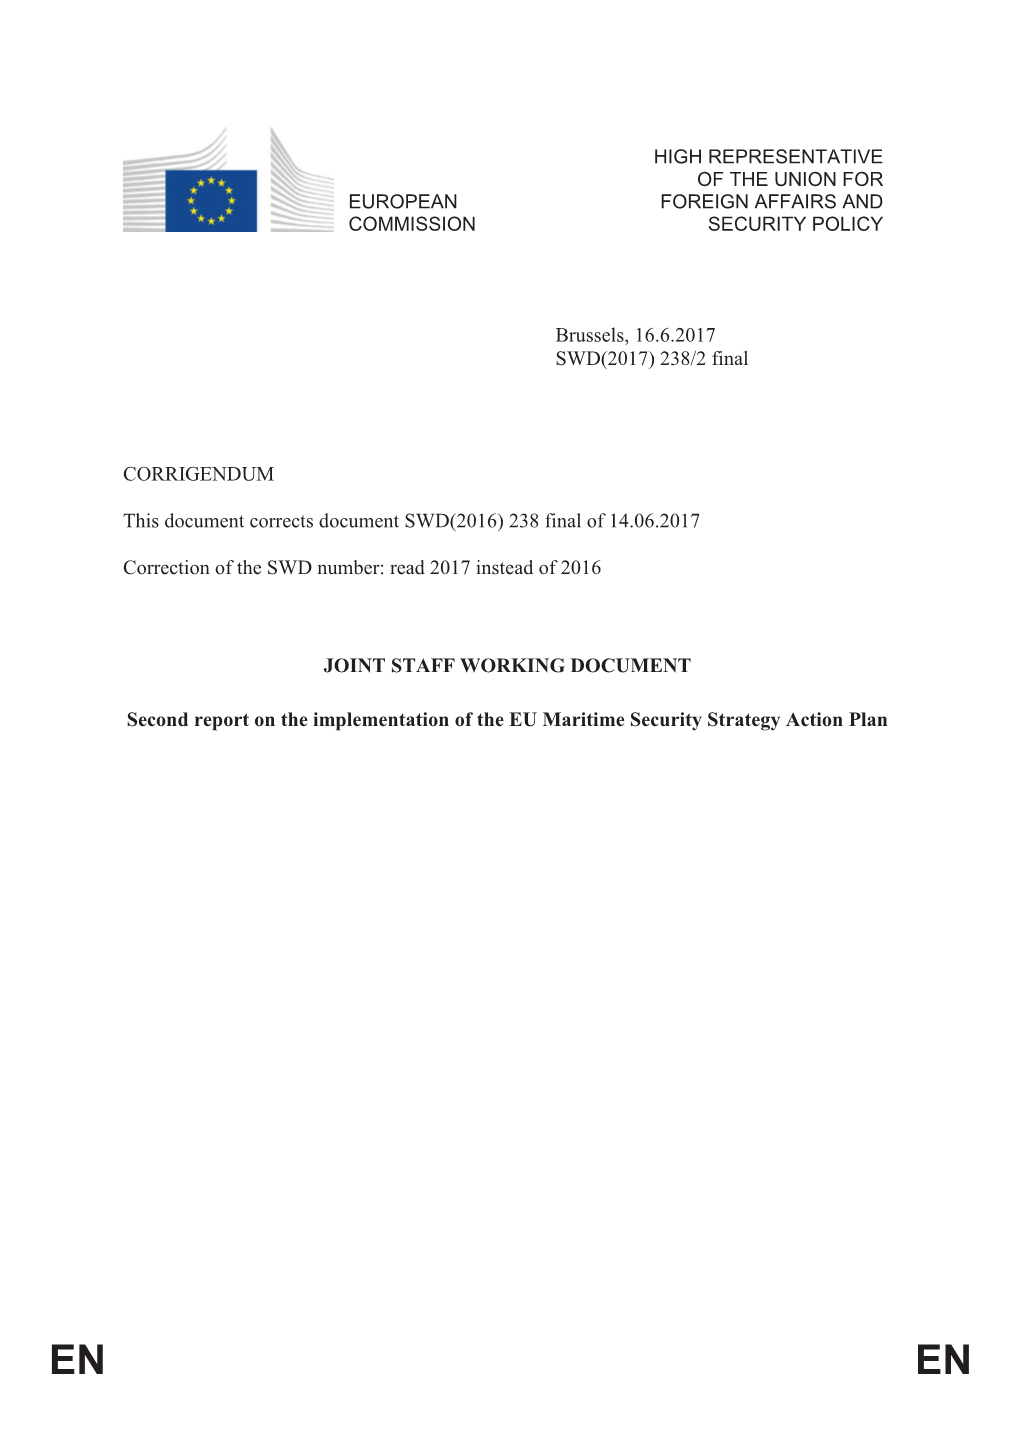 EUROPEAN COMMISSION HIGH REPRESENTATIVE of the UNION for FOREIGN AFFAIRS and SECURITY POLICY Brussels, 16.6.2017 SWD(2017) 238